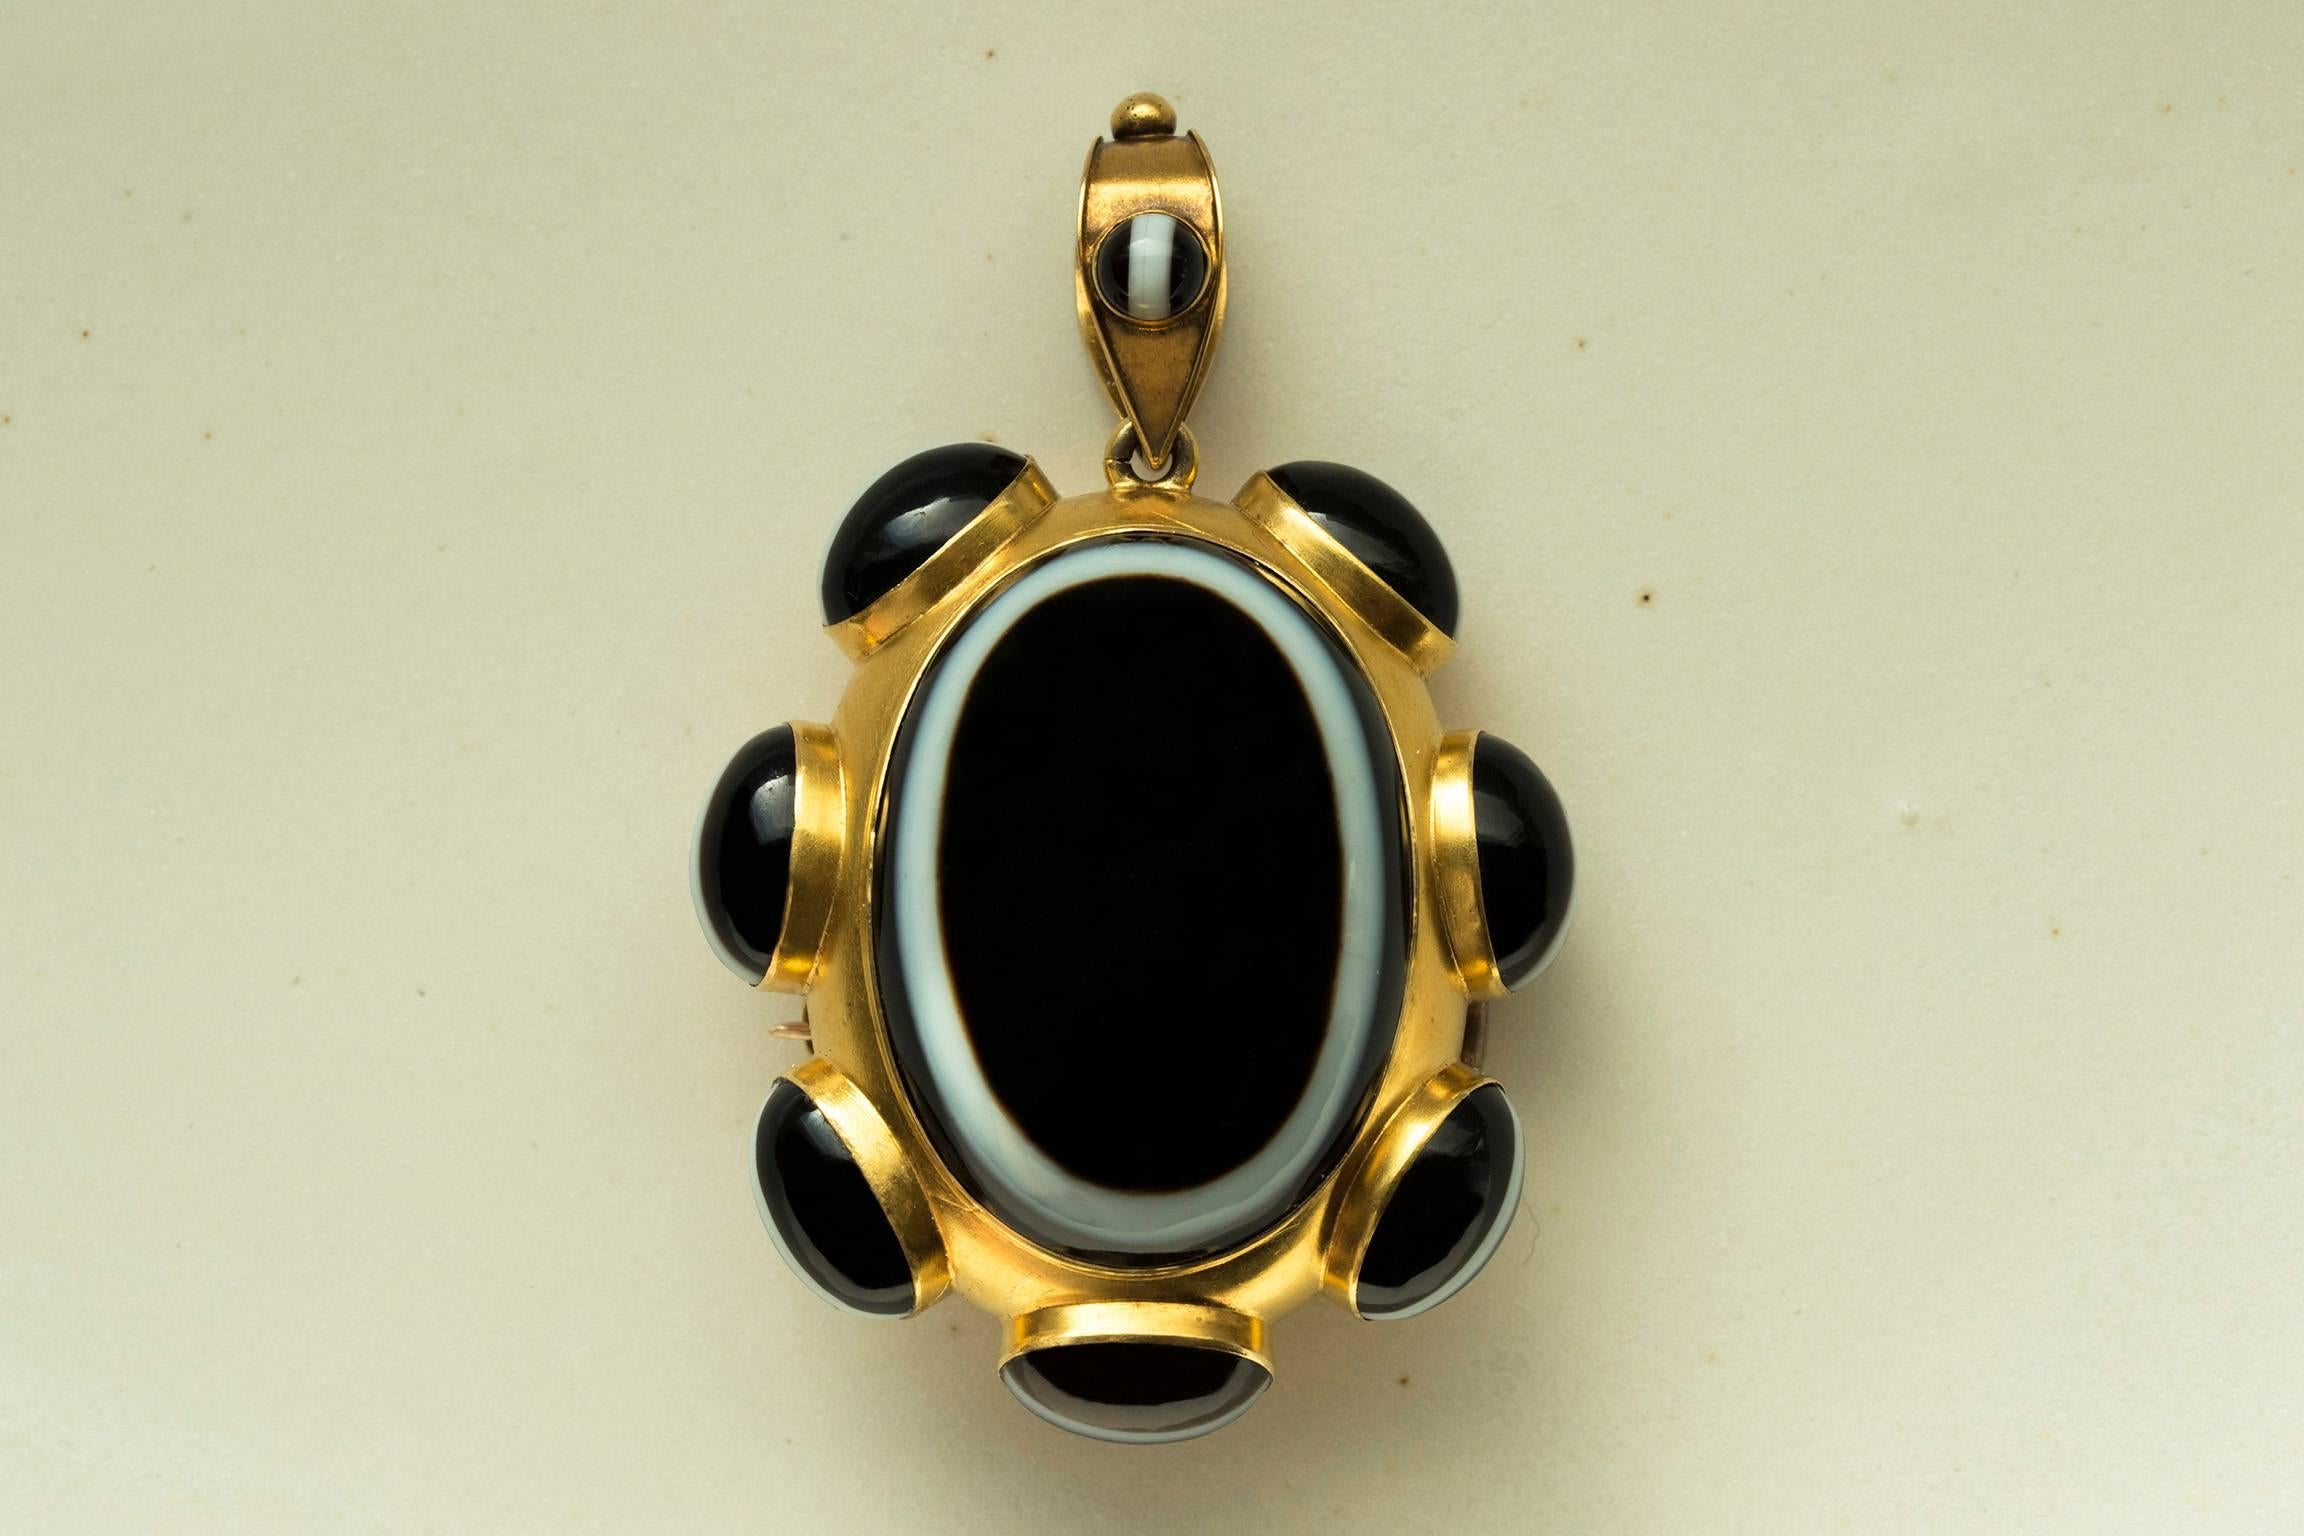 C.1870. A high quality Victorian banded agate gold oval pendant/pin with a locket compartment on the back. With the rich contrast of black and white, the consistent banding patterns and colors correspond beautifully. A small matching banded agate